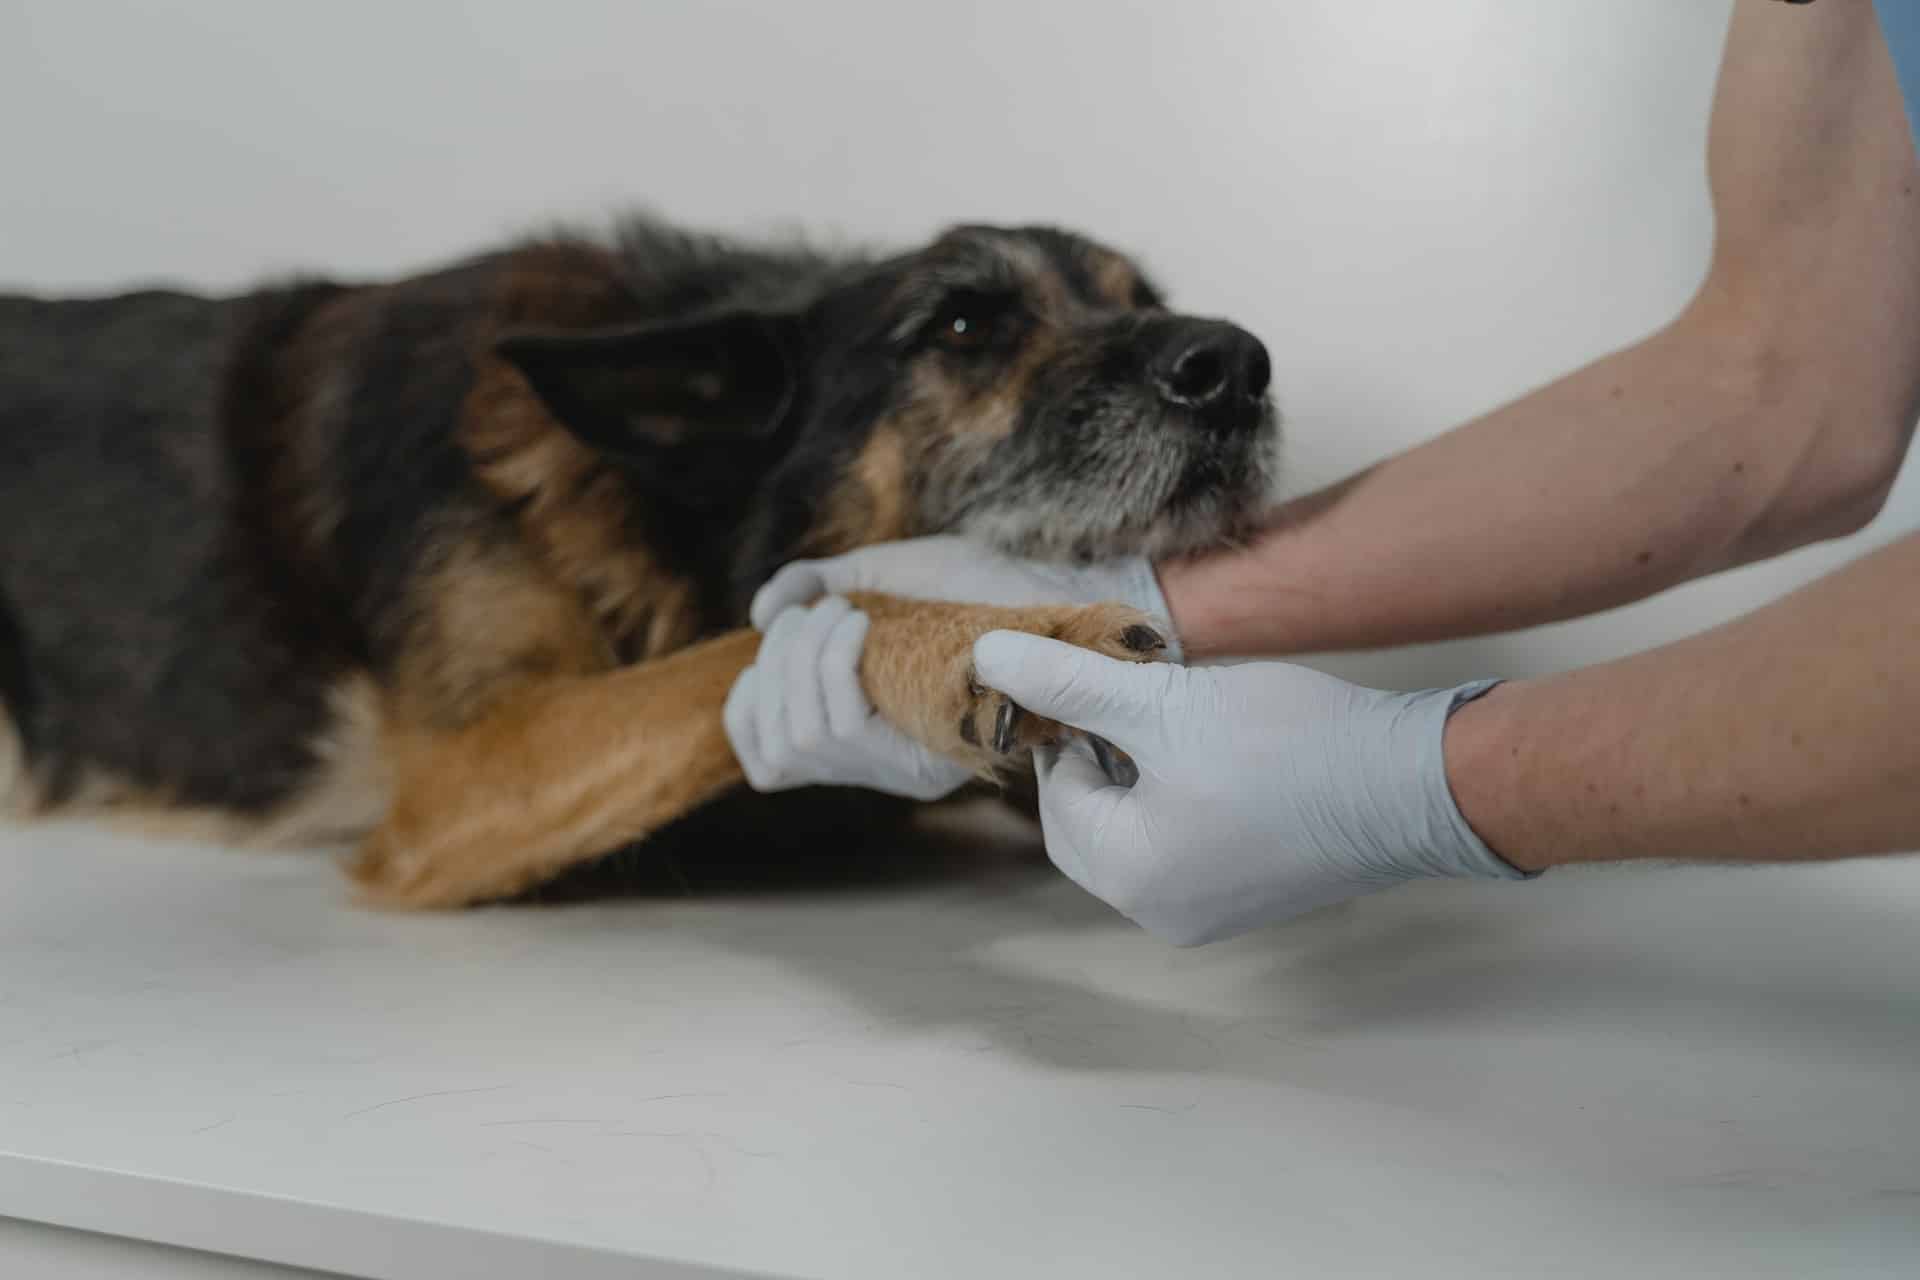 A sick dog being examined by a vet